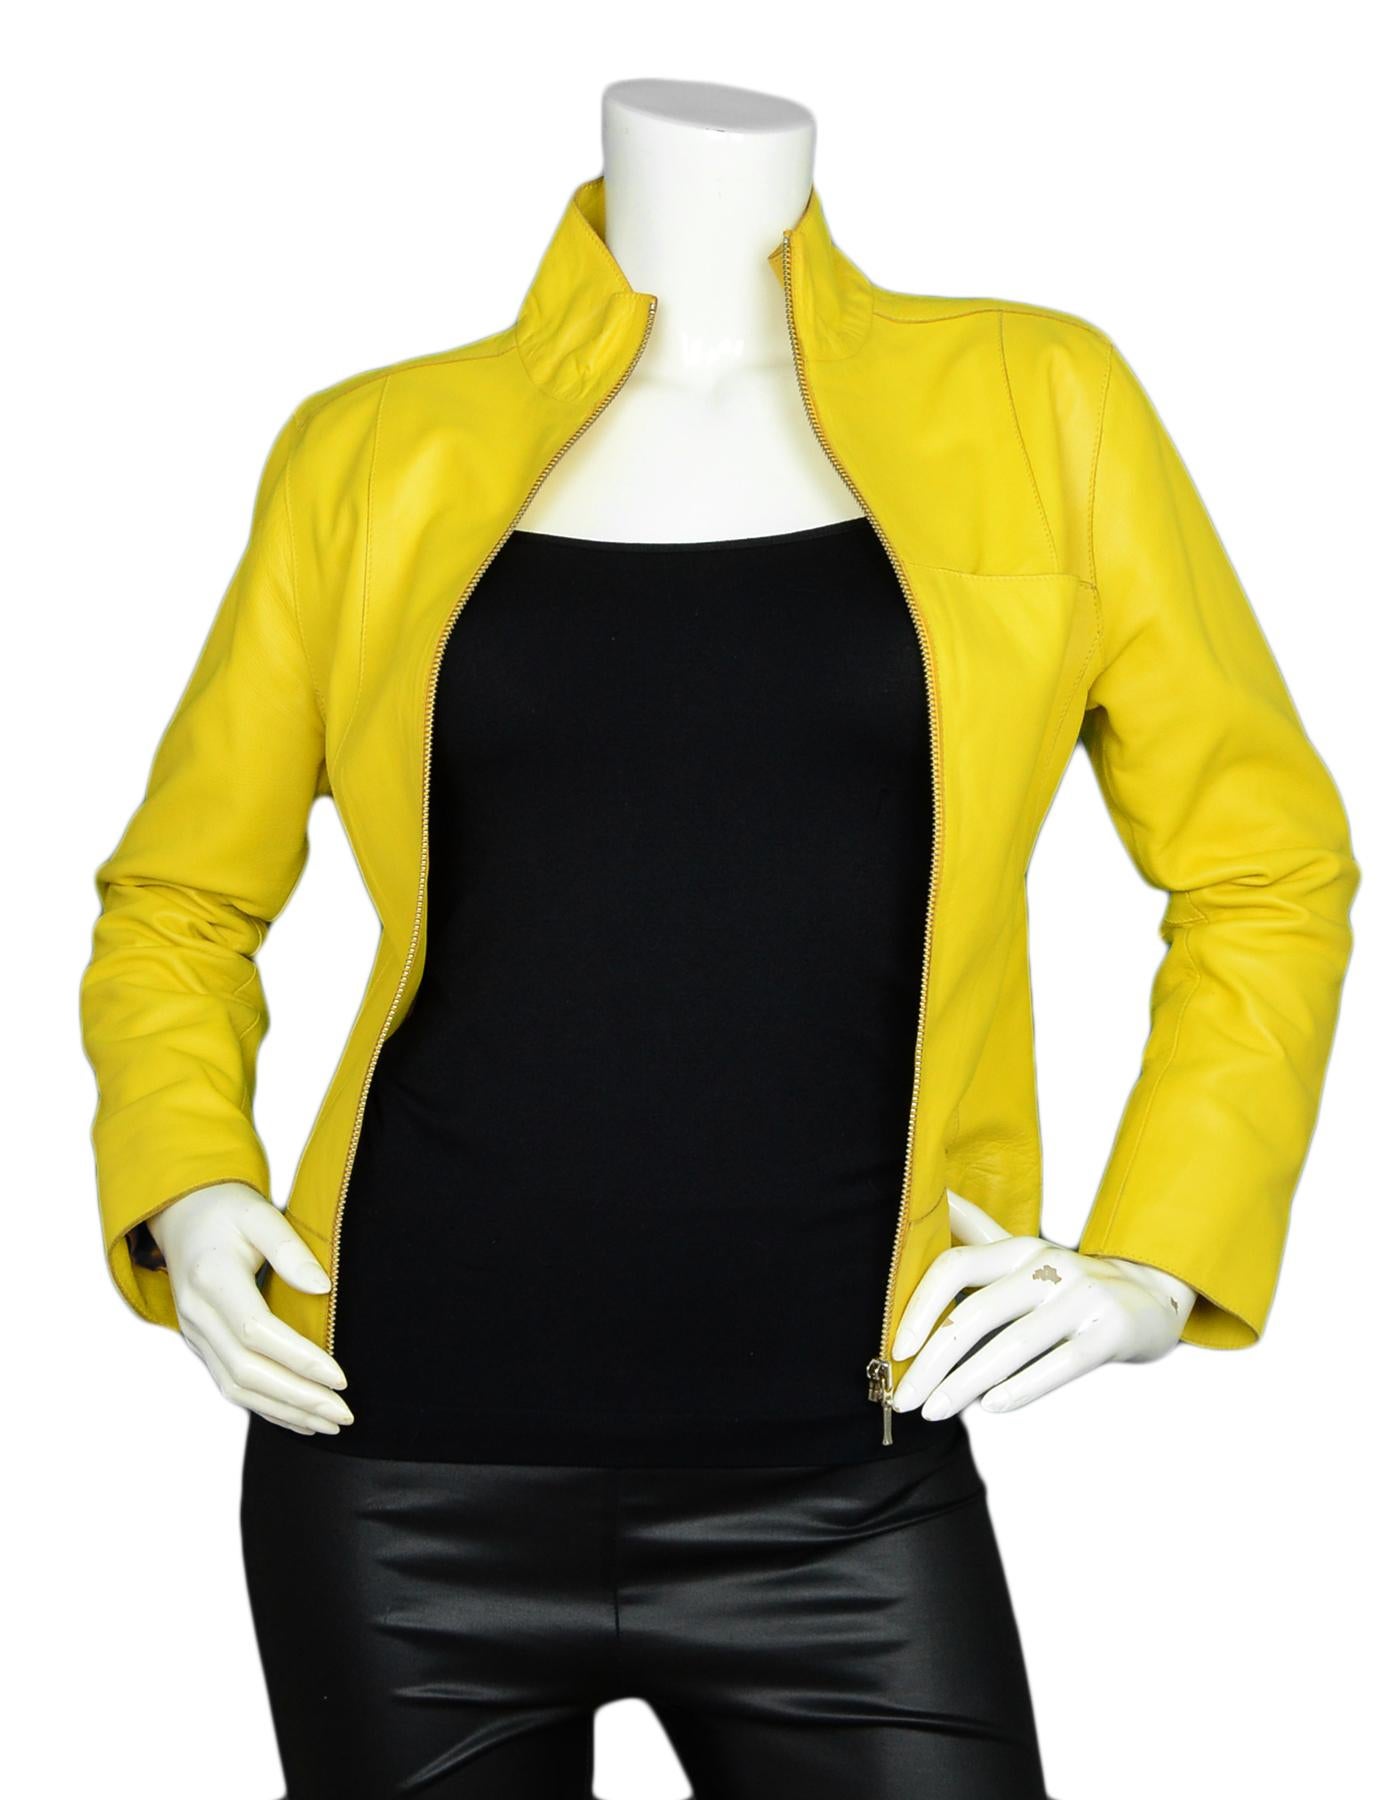 Tufi Duek Yellow Leather Front Zip Jacket 

Made In: Brazil 
Color: Yellow
Materials: 100% Leather
Lining: 100% Acetate
Opening/Closure: Front zip
Overall Condition: Excellent pre-owned condition
Tag Size: IT40 *Please refer to measurements to